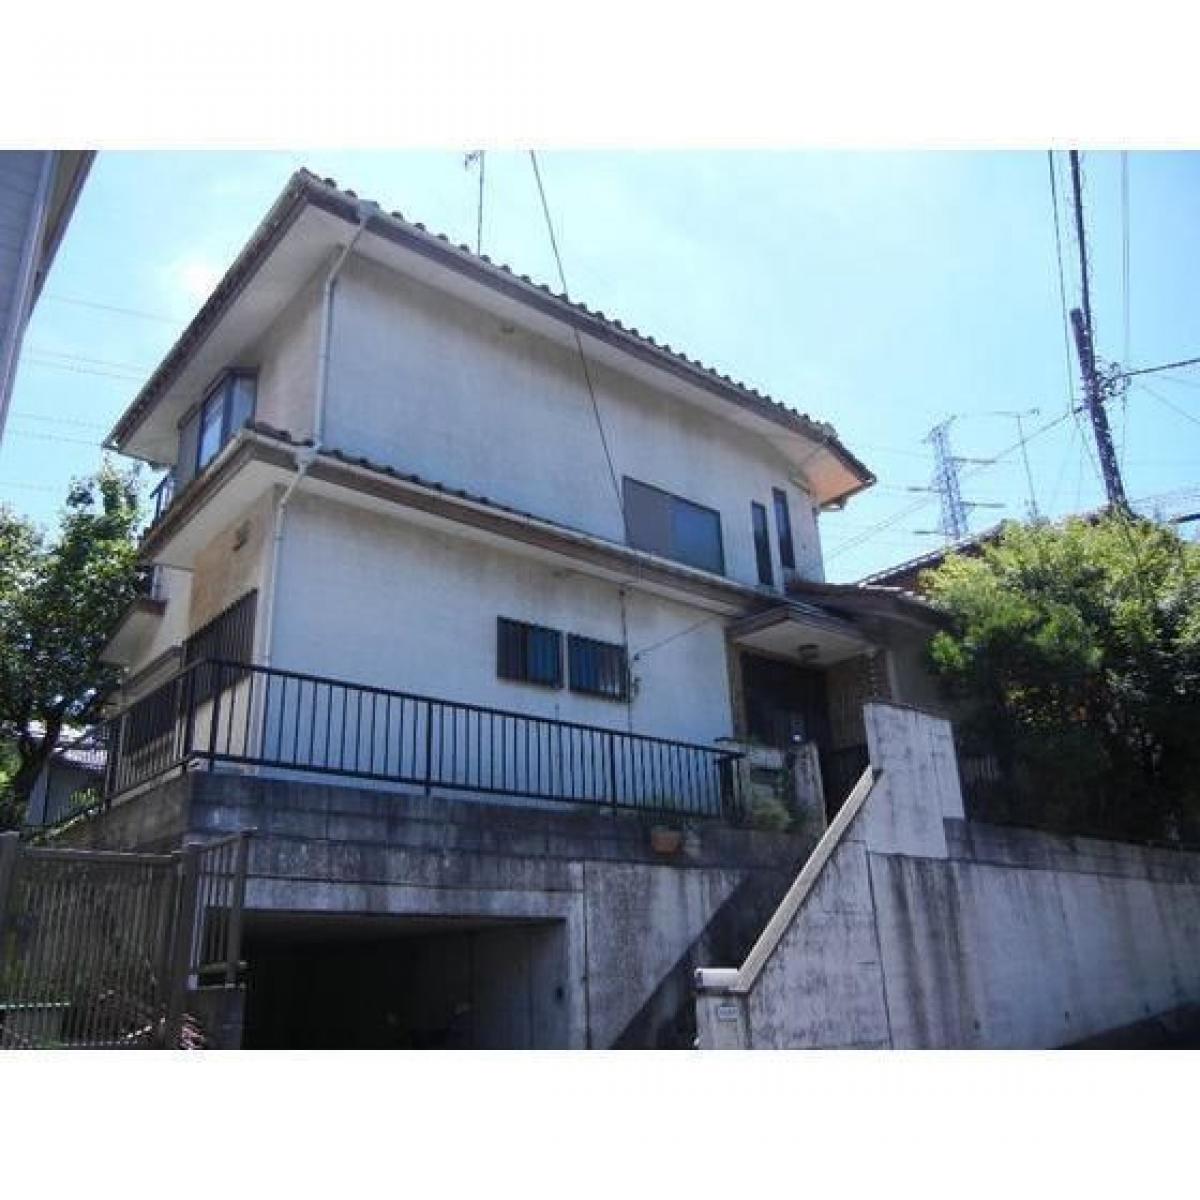 Picture of Home For Sale in Machida Shi, Tokyo, Japan